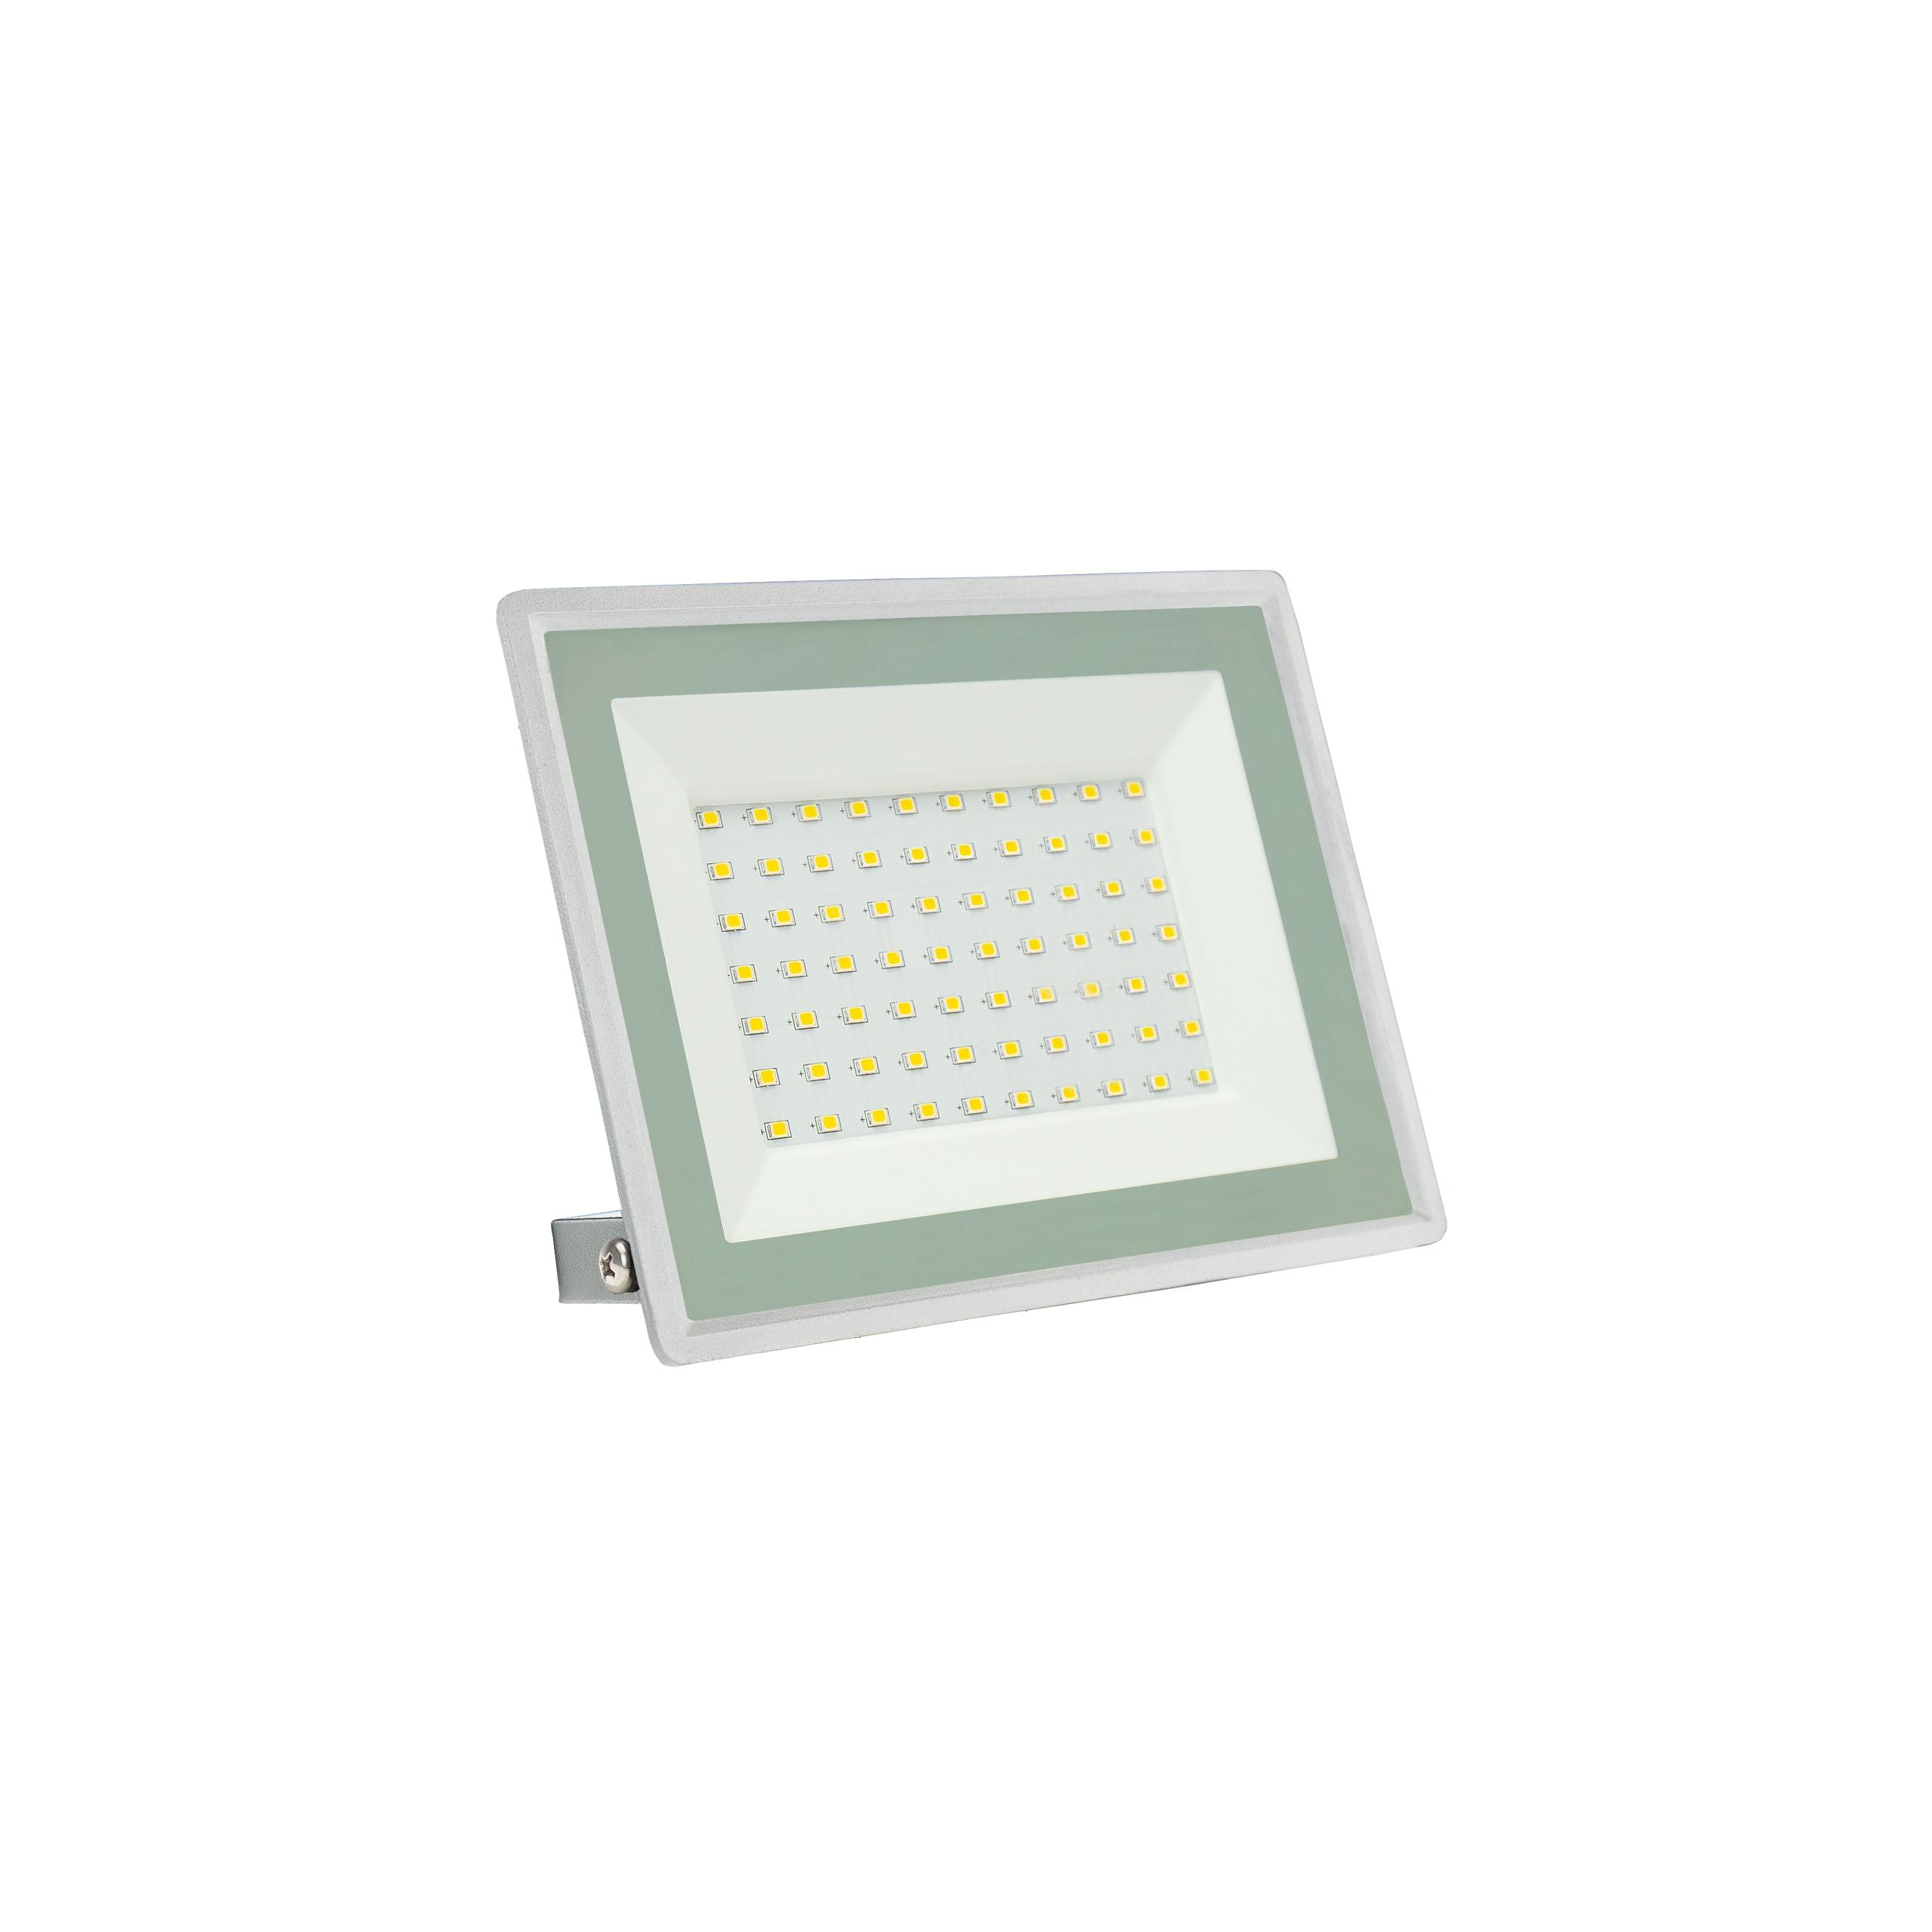 NOCTIS LUX 3 FLOODLIGHT 50W NW 230V IP65 180X140X27MM WHITE